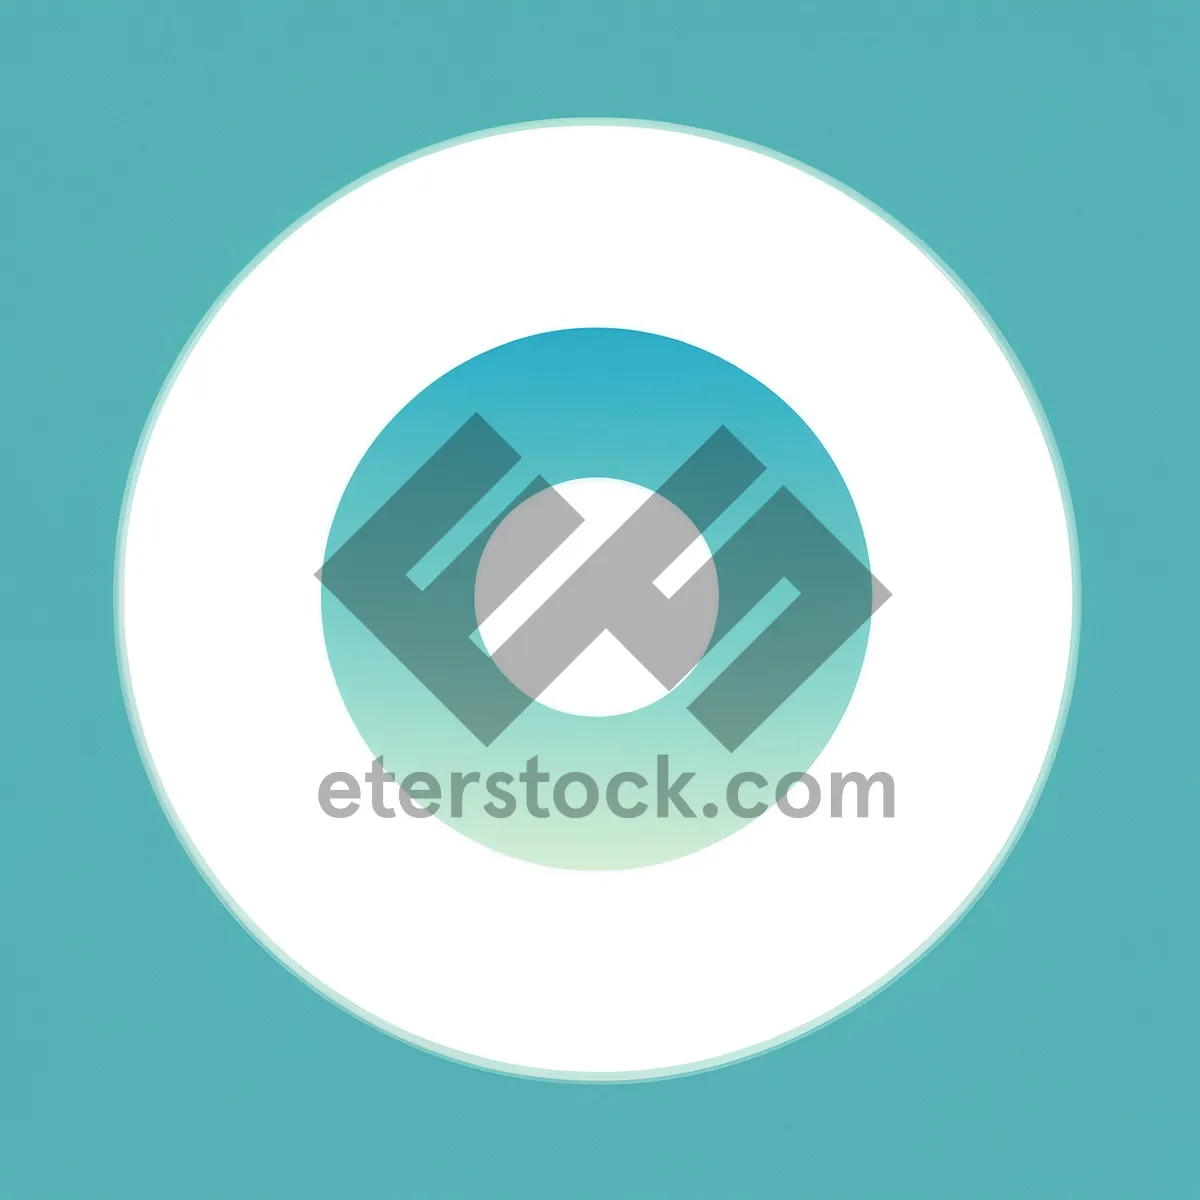 Picture of Glossy Web Buttons Set - Shiny Round Symbols